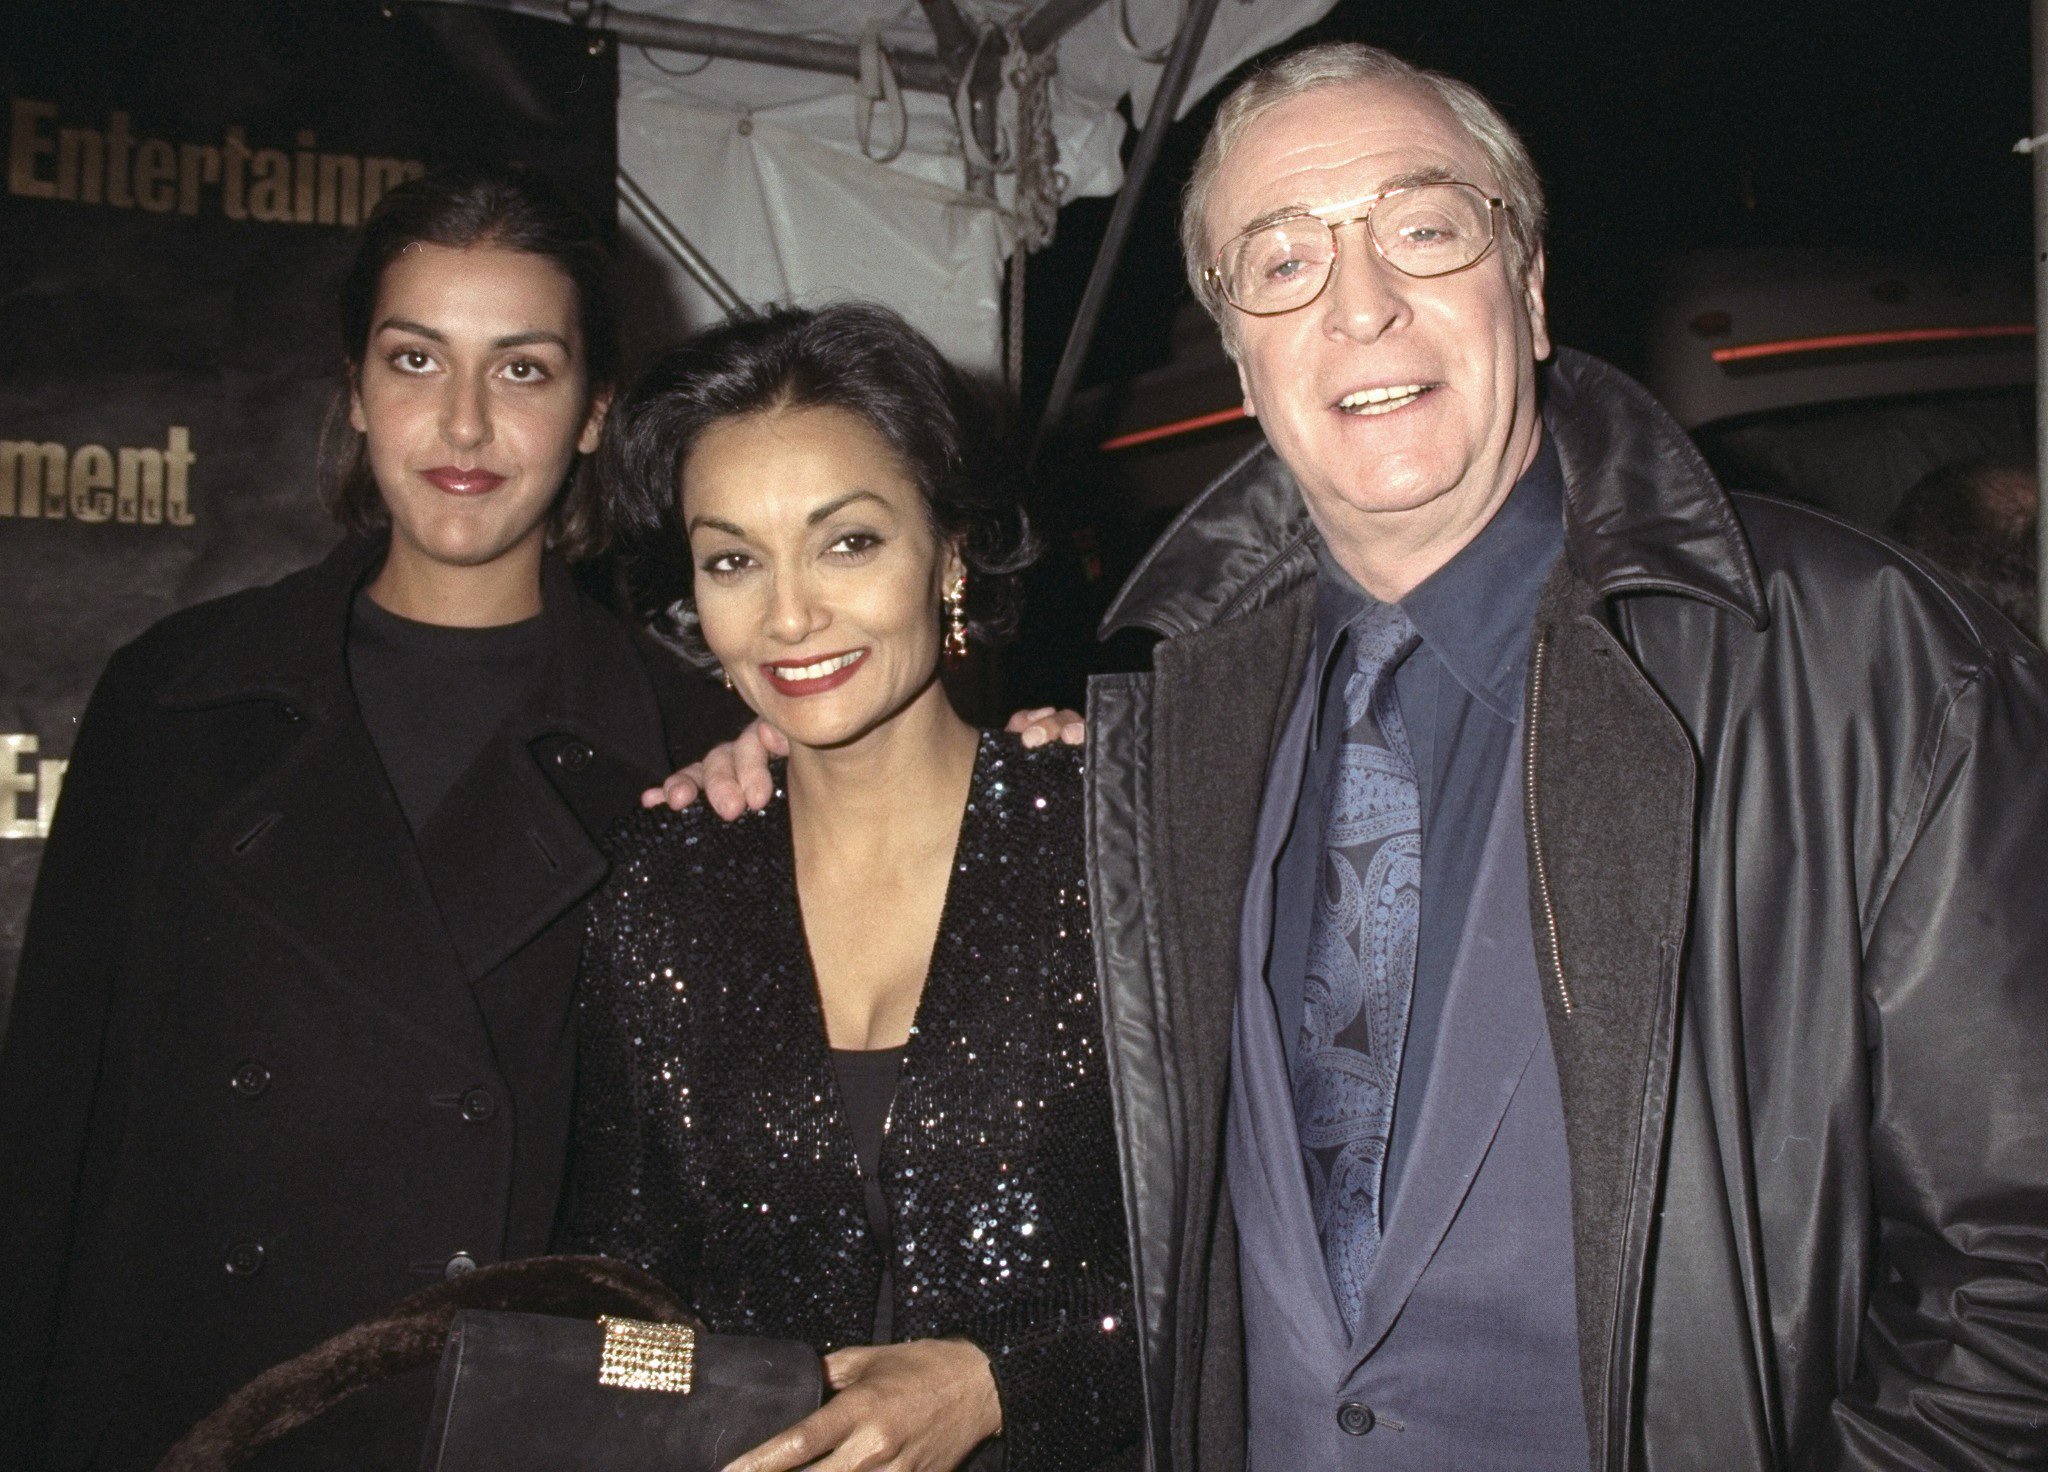 Michael Caine, with wife Shakira and daughter Natasha, attending Entertainment Weekly's Oscar party at Elaine's. | Photo: Getty Images